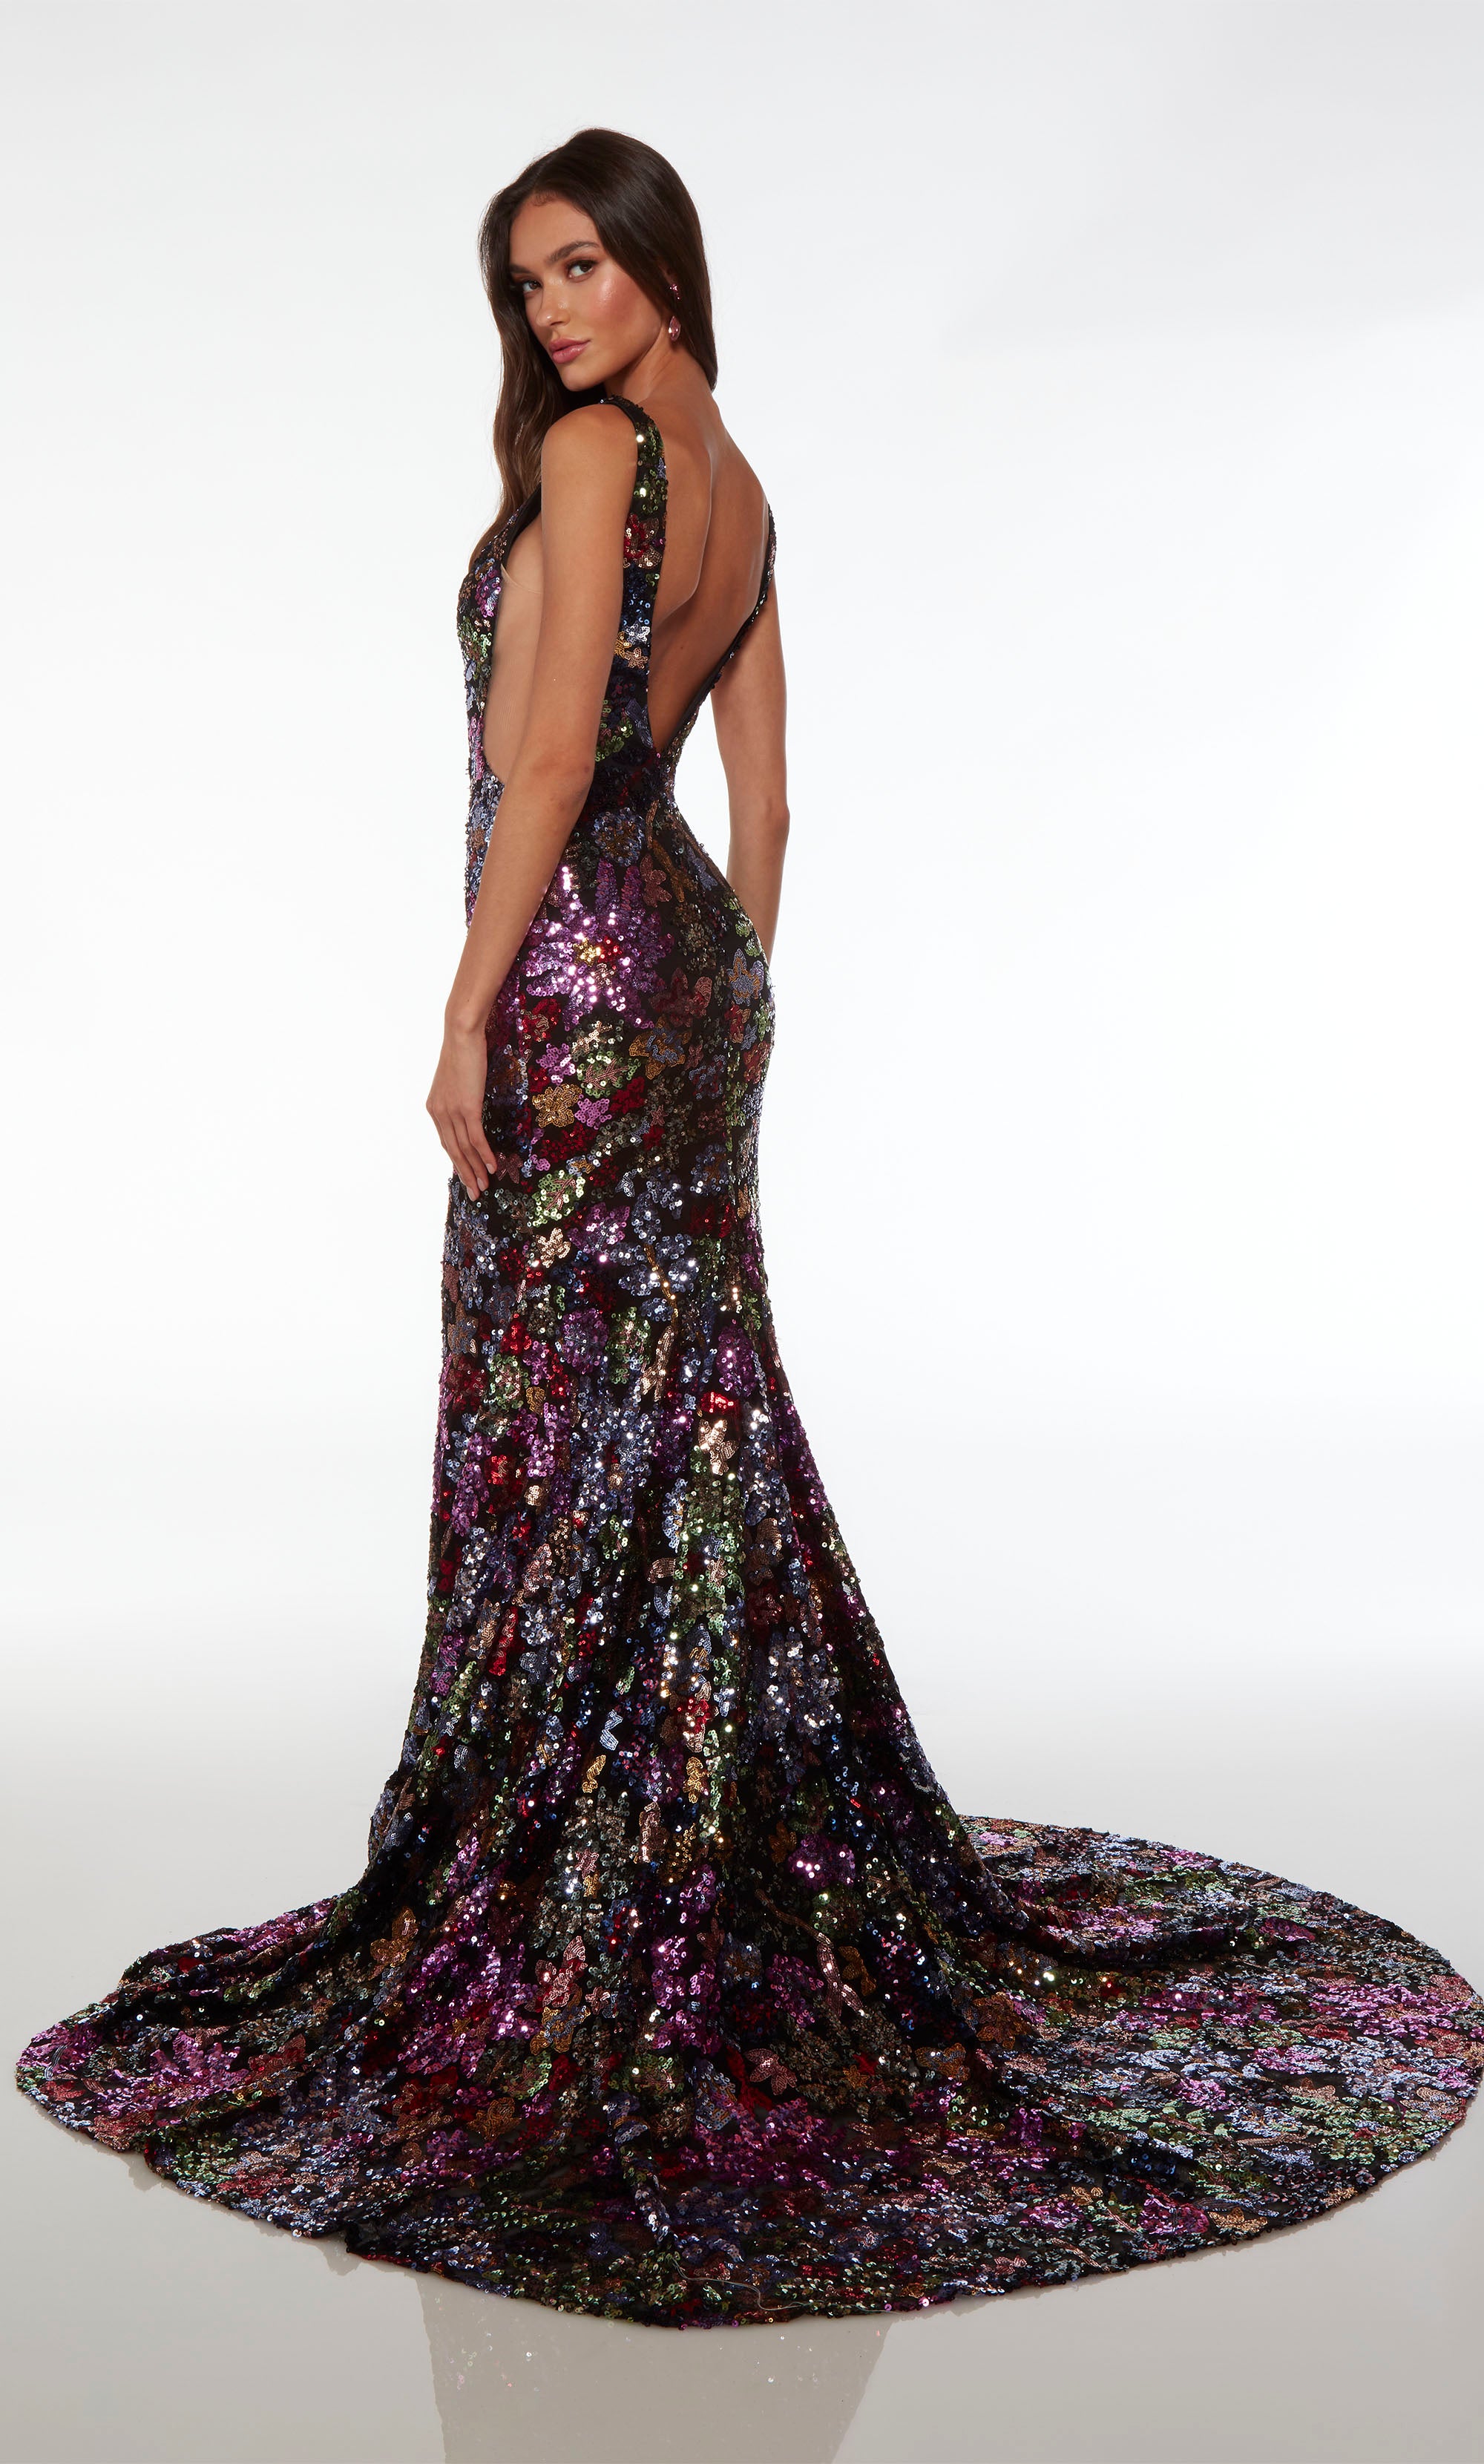 Black-multi formal dress with plunging neckline, fit-and-flare silhouette, illusion side cutouts, low V back, and an long glamorous train.